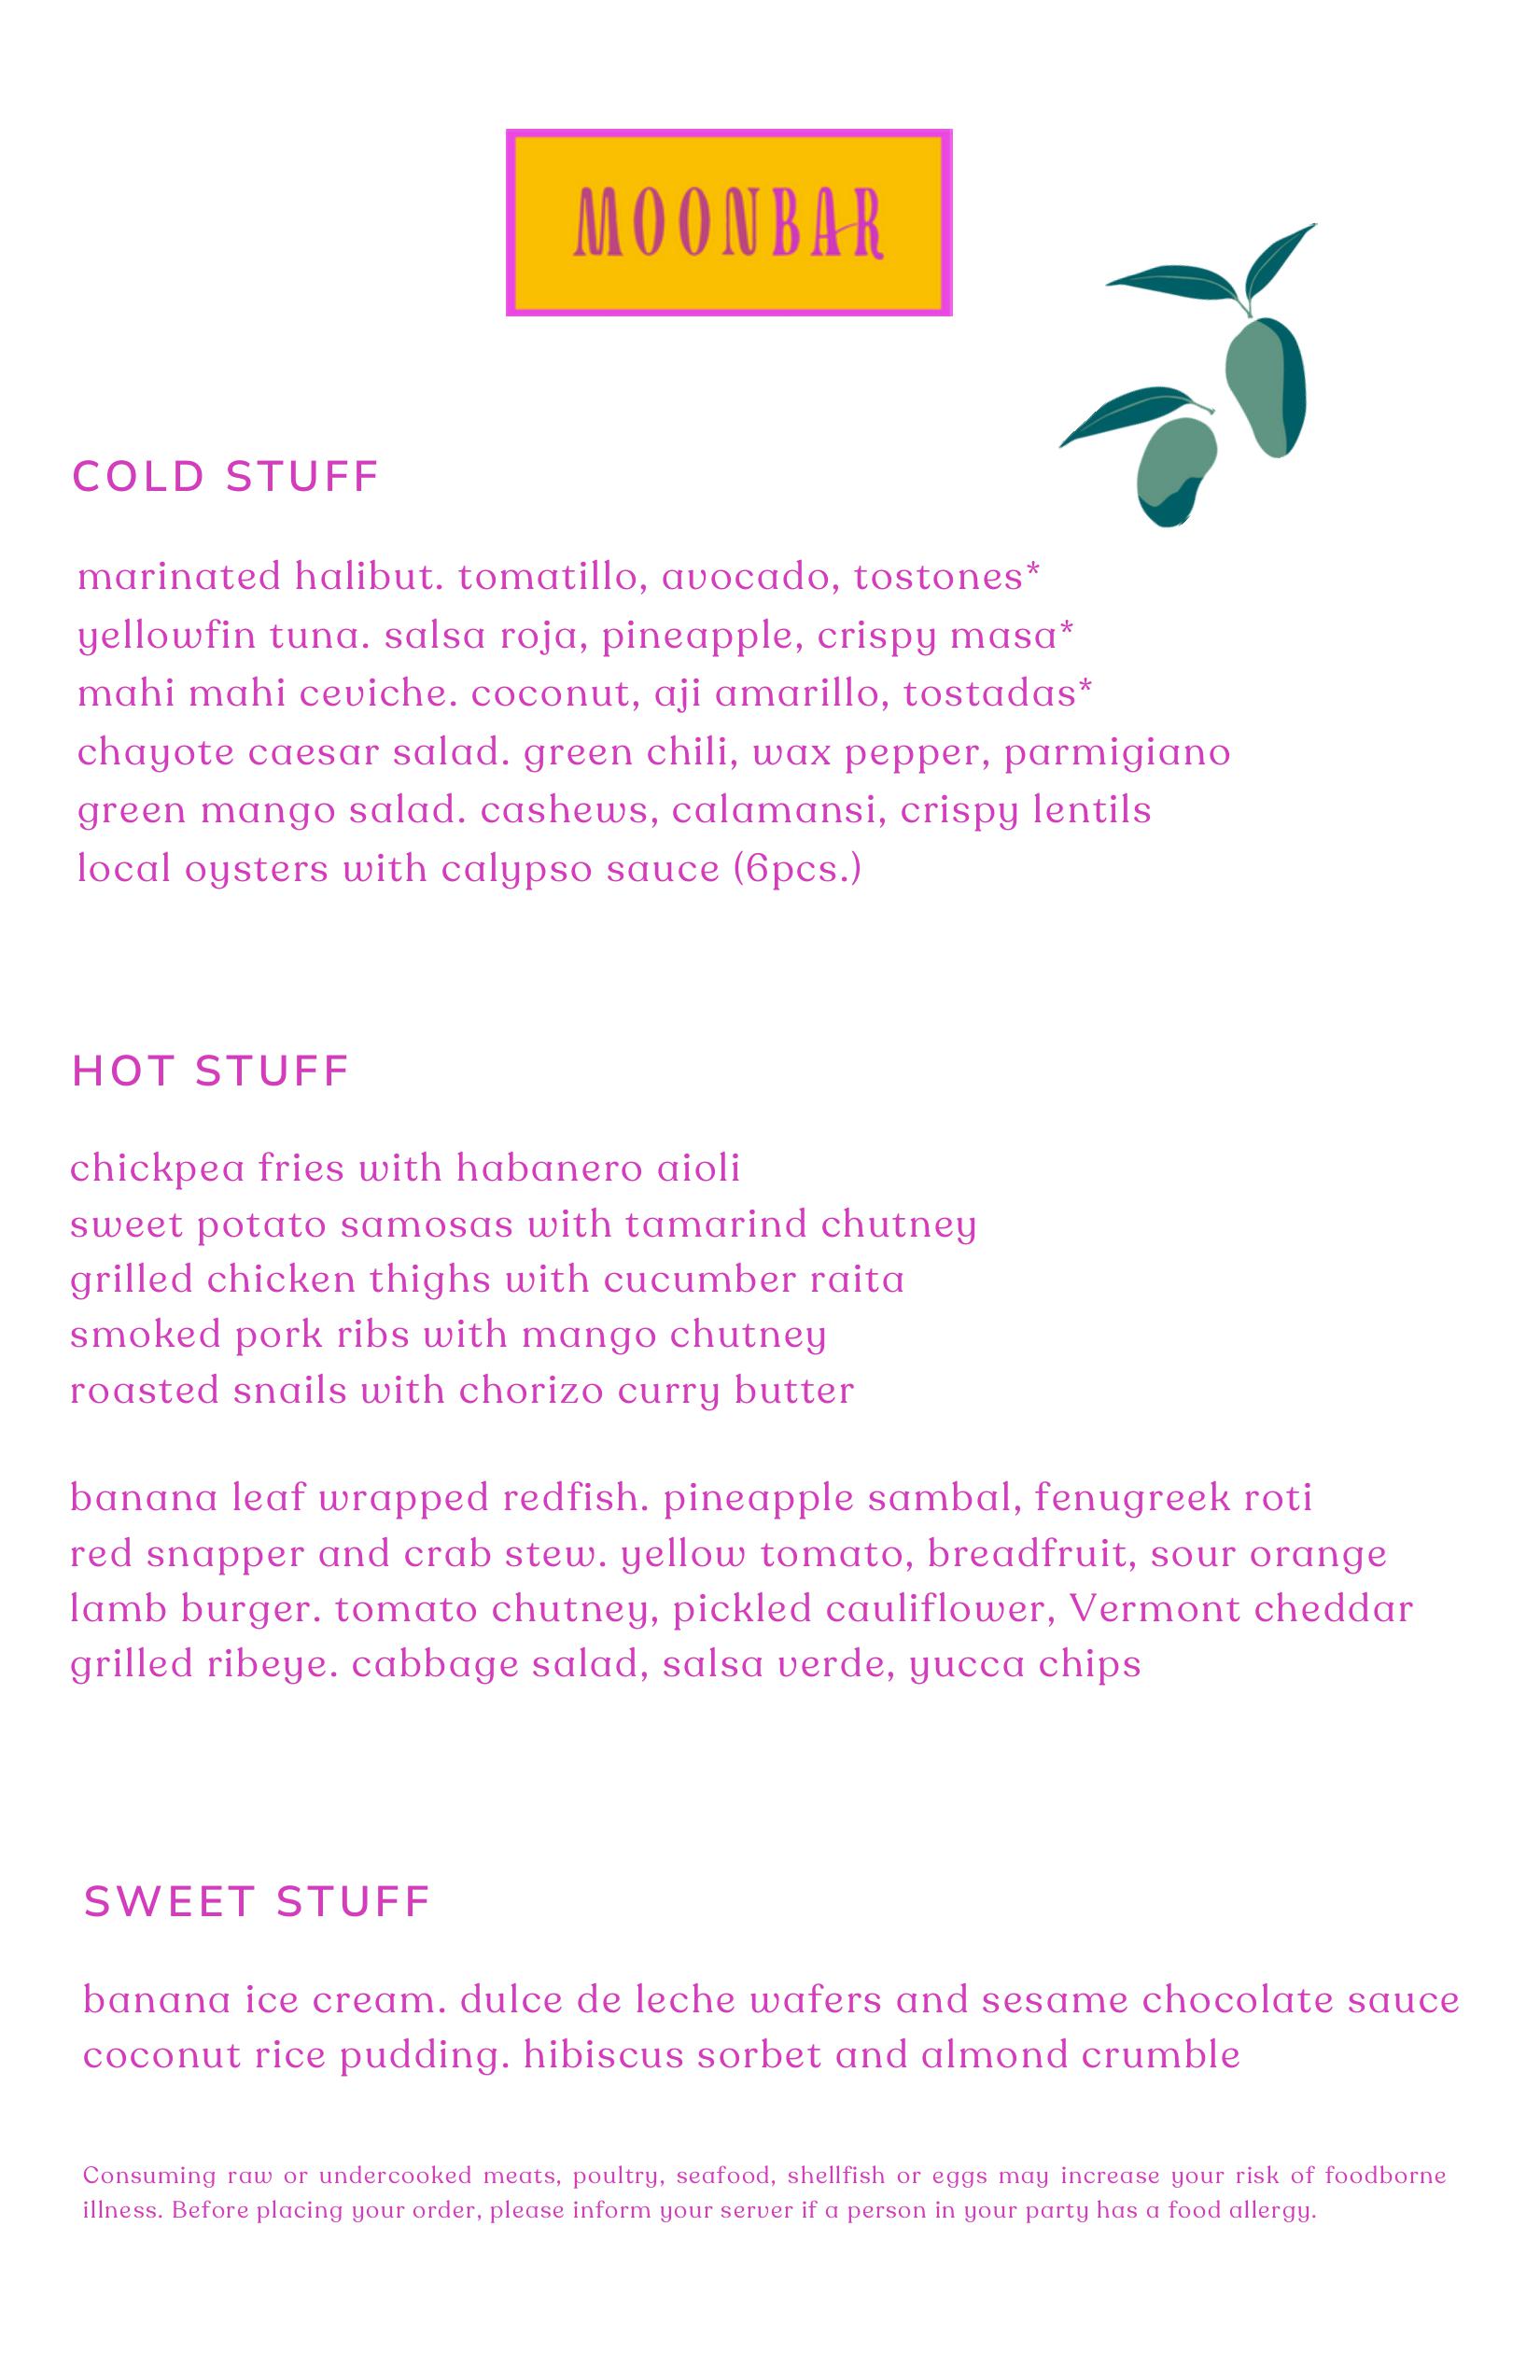 Opening menu for a restaurant named Moon Bar, featuring sections labelled cold and hot.